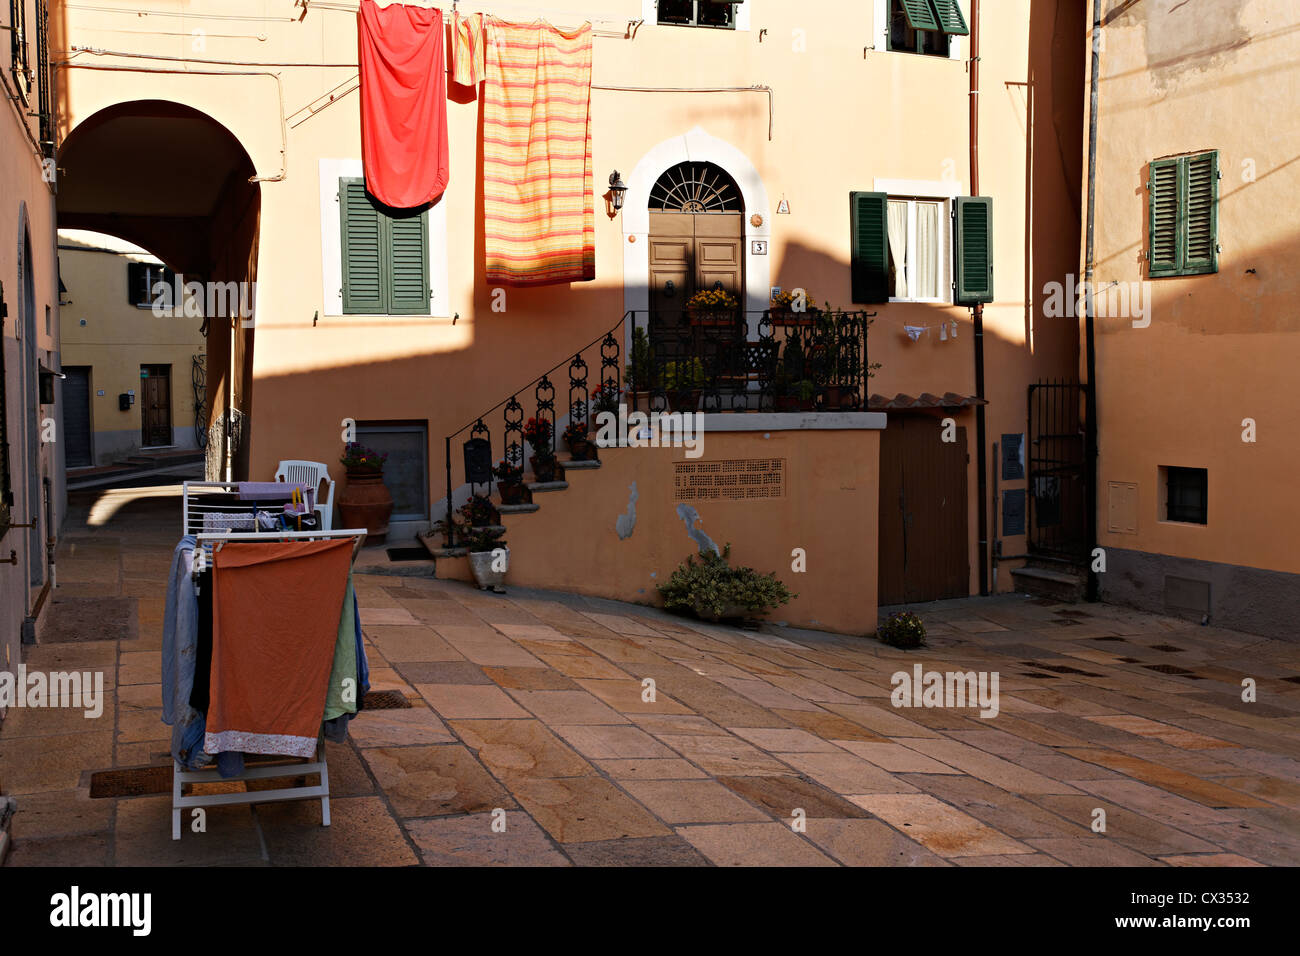 Bed linen and clothes washing in courtyard, Castellina Marittima Tuscany Italy Stock Photo